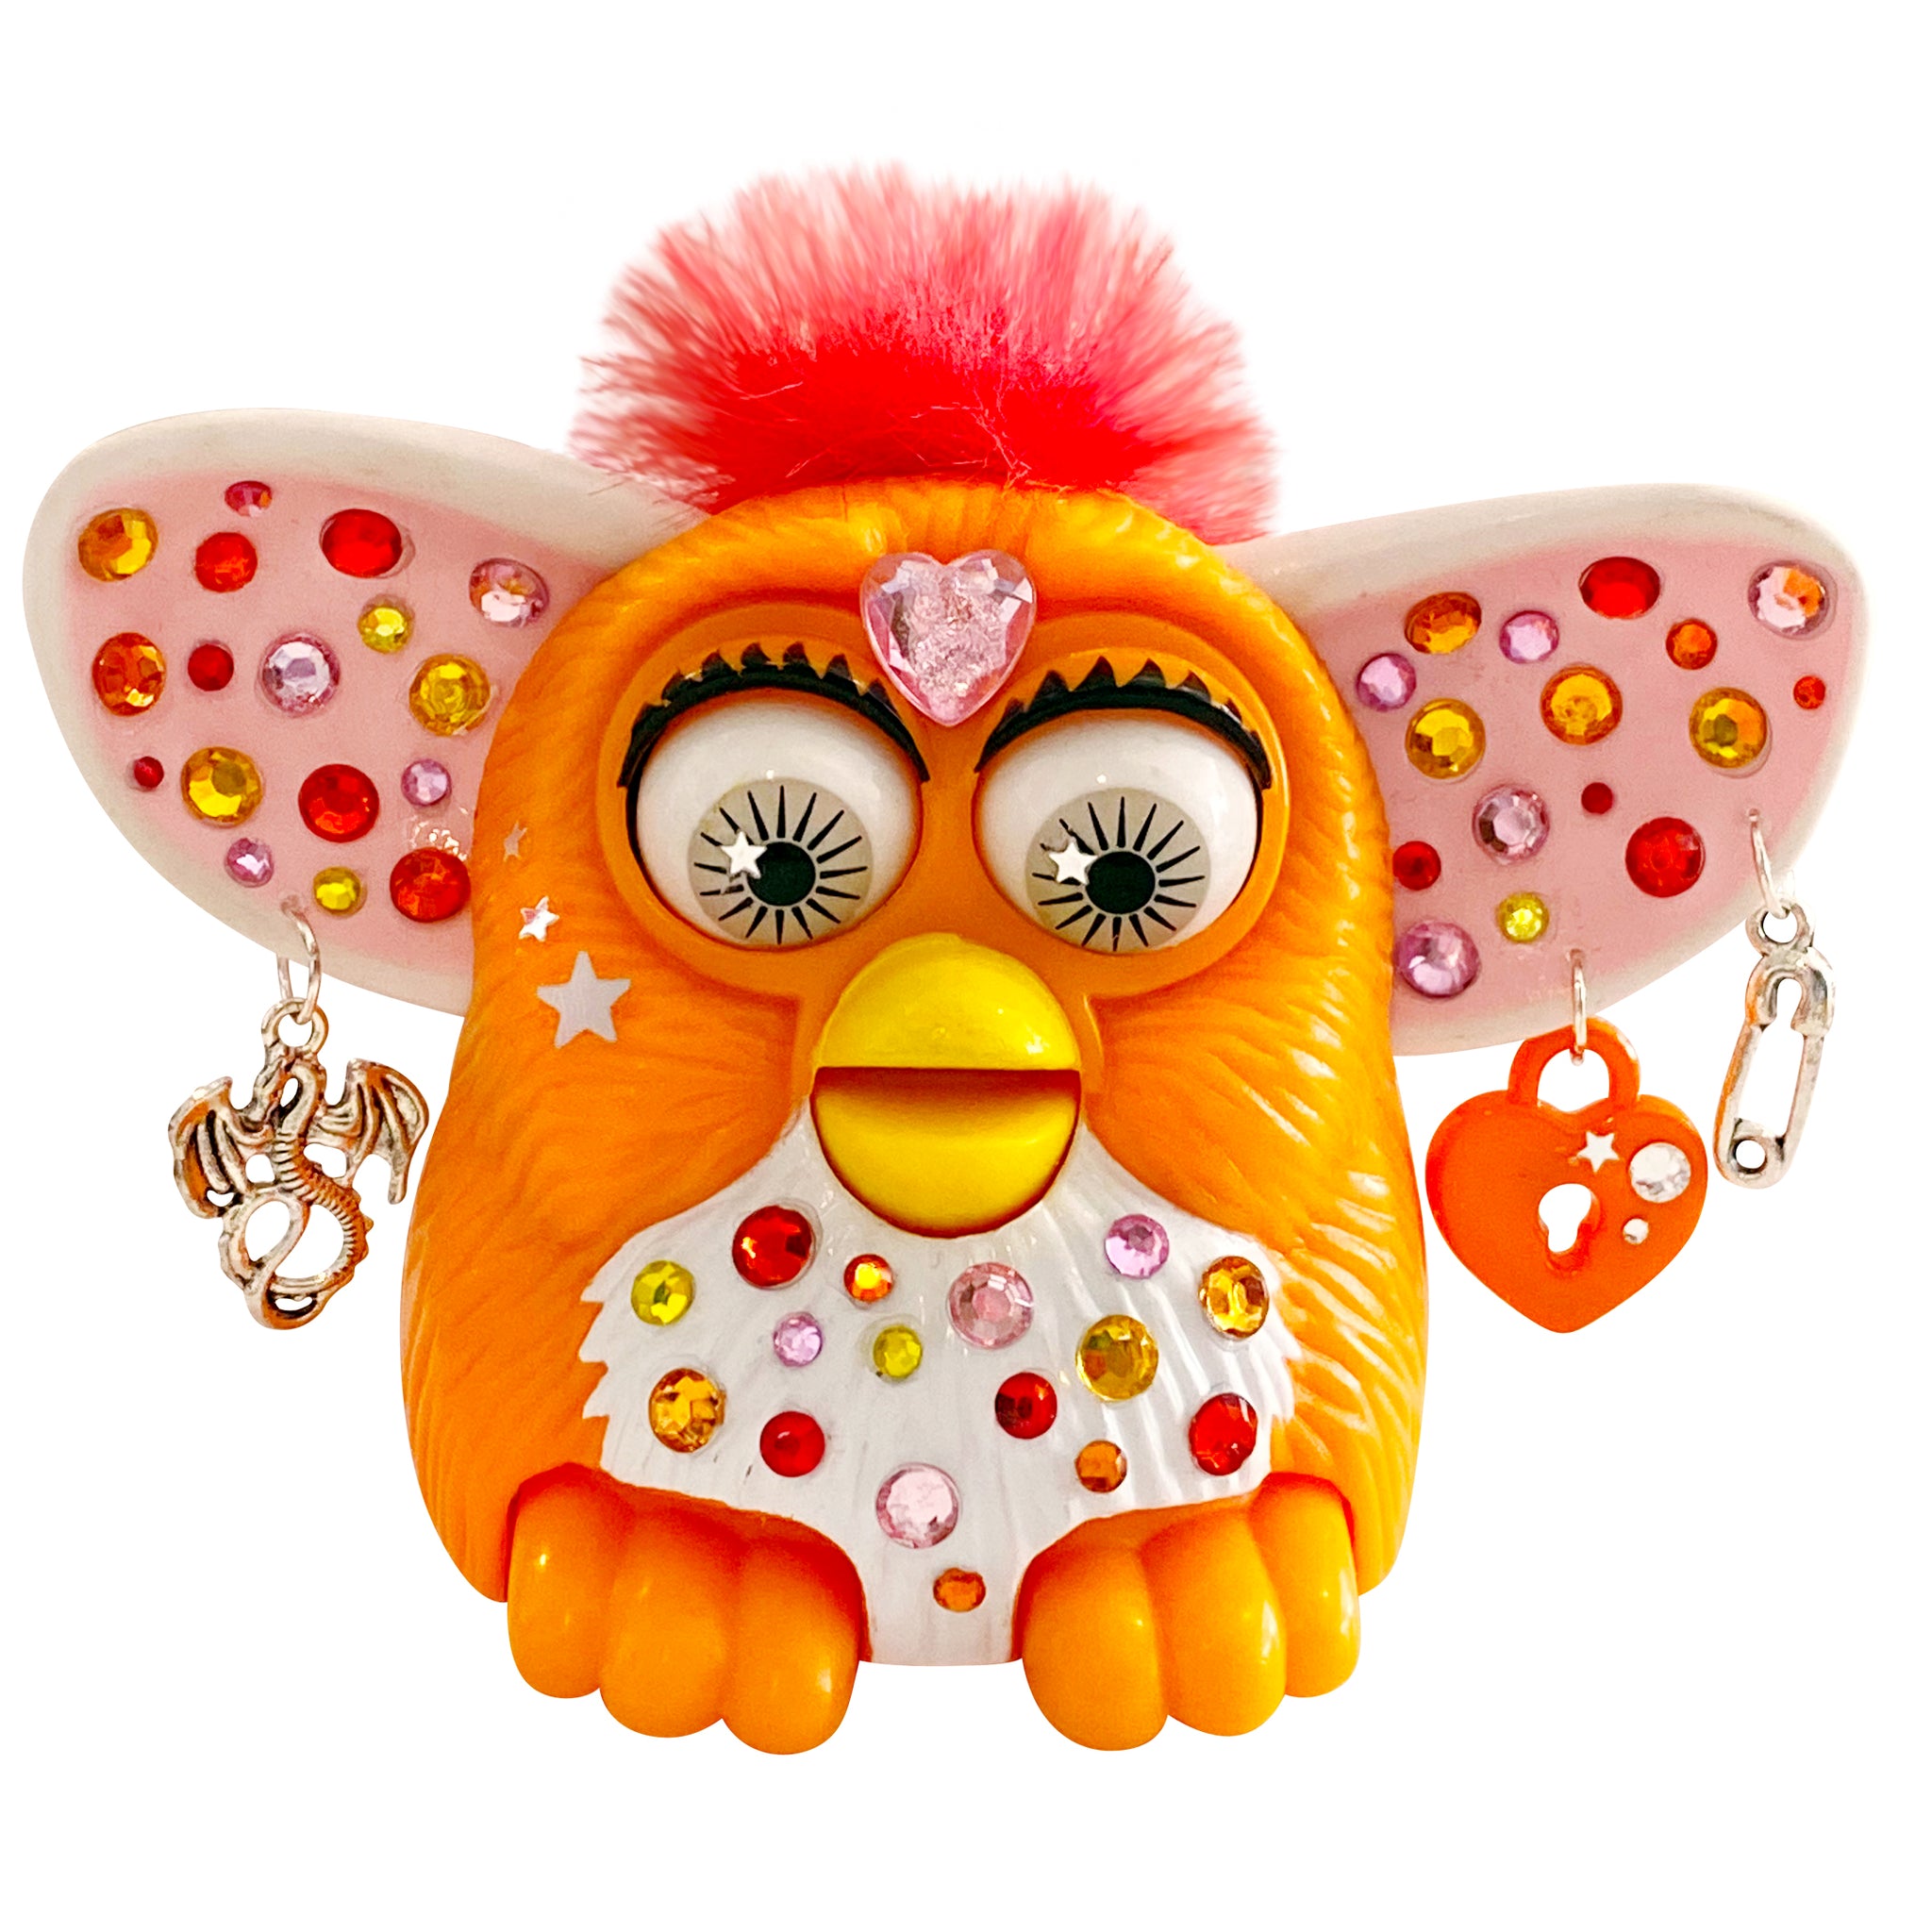 Iggy - Bedazzled 90's Furby